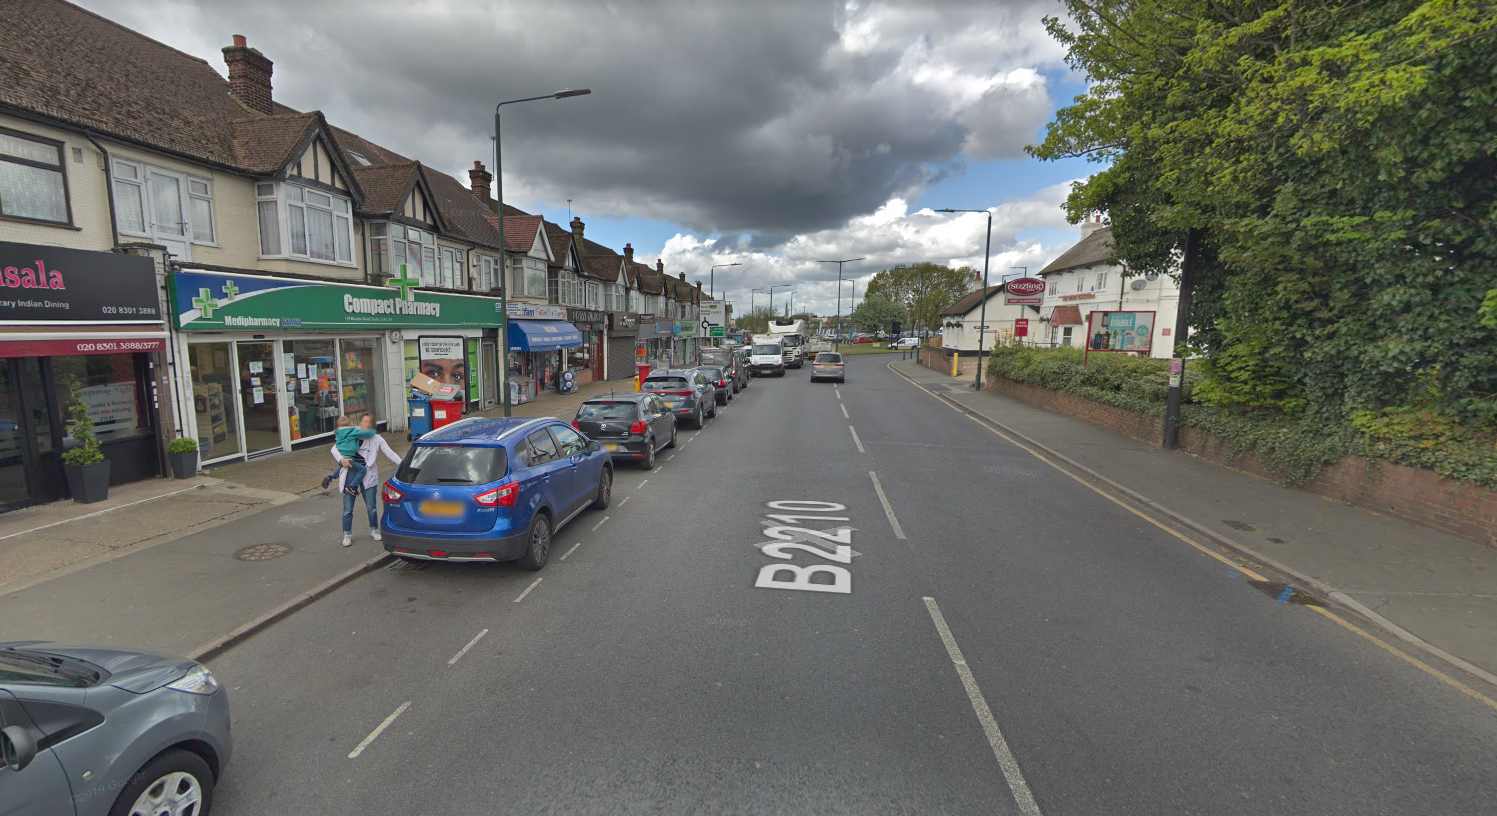 Bexley shopkeeper stabbed in horrific daytime robbery as police continue to hunt suspects